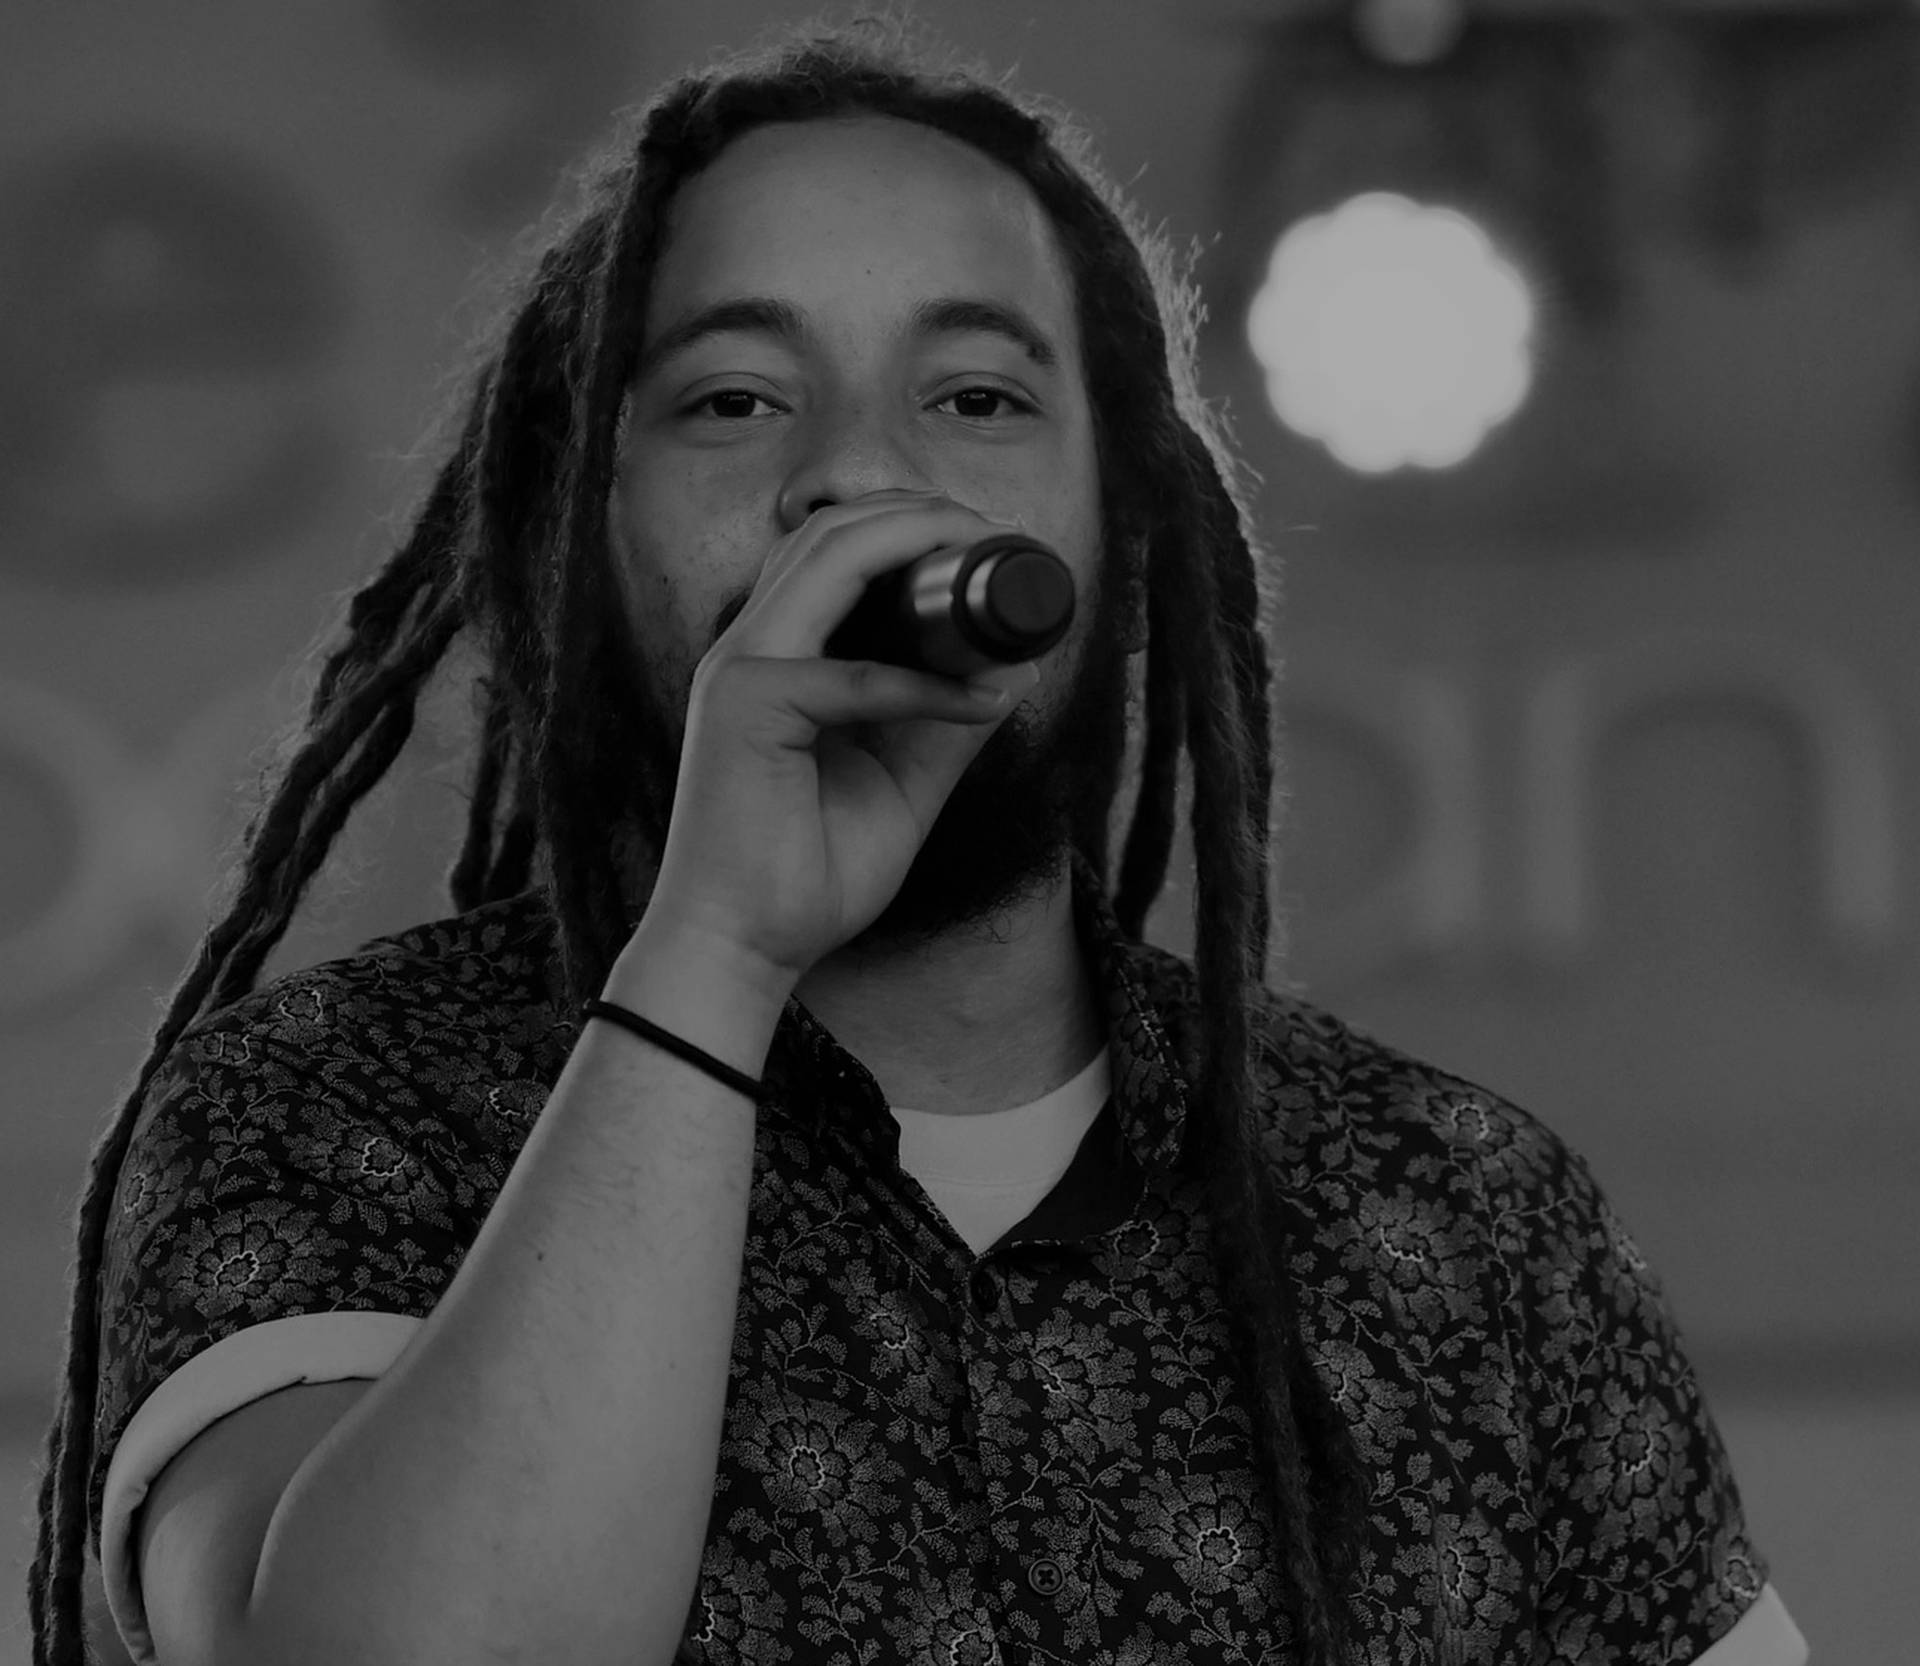 JO MERSA MARLEY brings the reggae to the oceanfront at Neptunes Park on 31st street in Virginia Beach, Virginia on 6 August 2019. JO MERSA MARLEY given name   Joseph ''Jo Mersa'' Marley (born March 12, 1991 in Kingston, Jamaica) is a Jamaican American reg